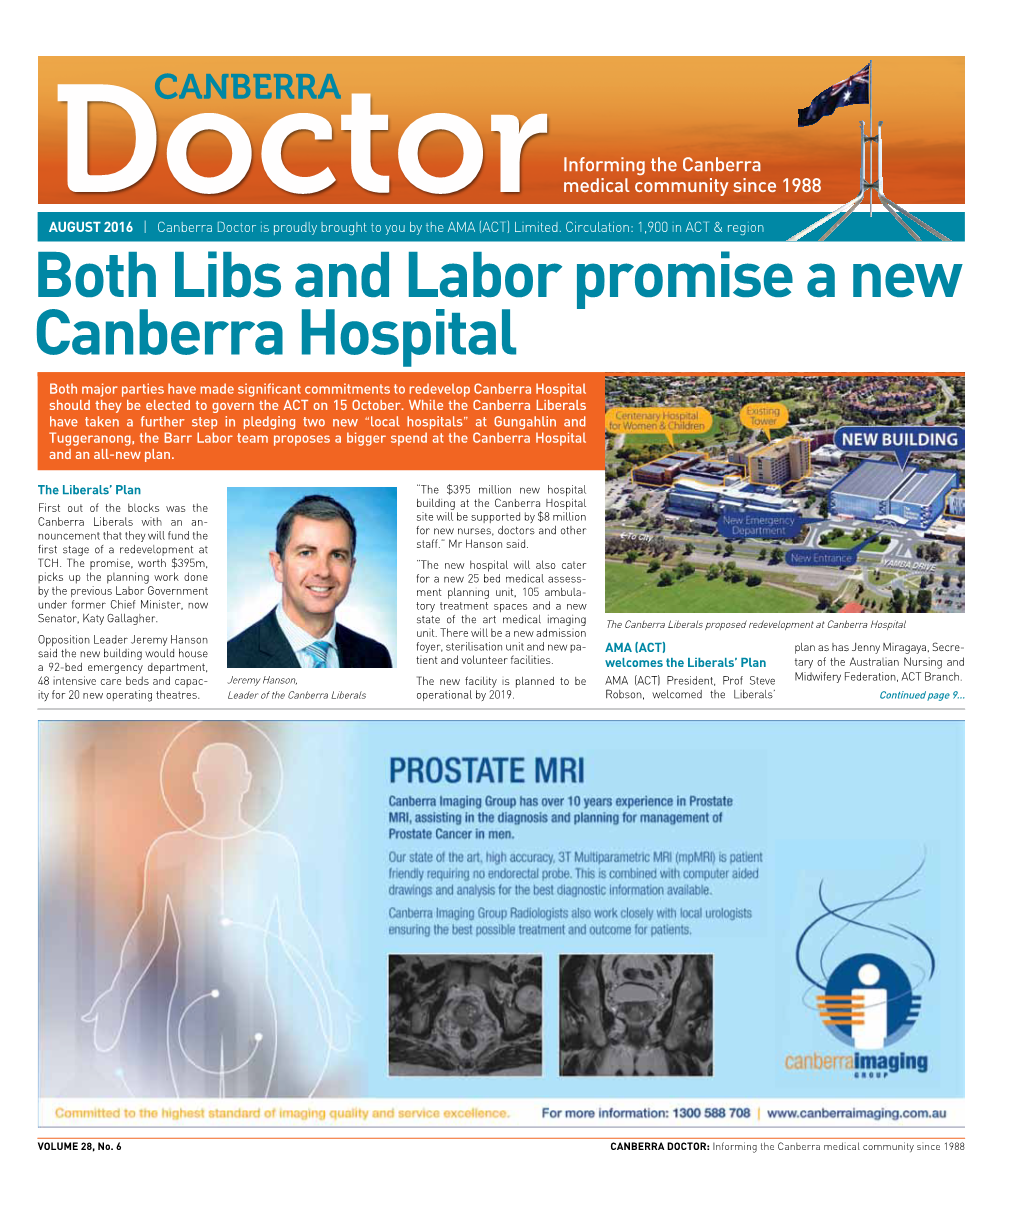 Both Libs and Labor Promise a New Canberra Hospital